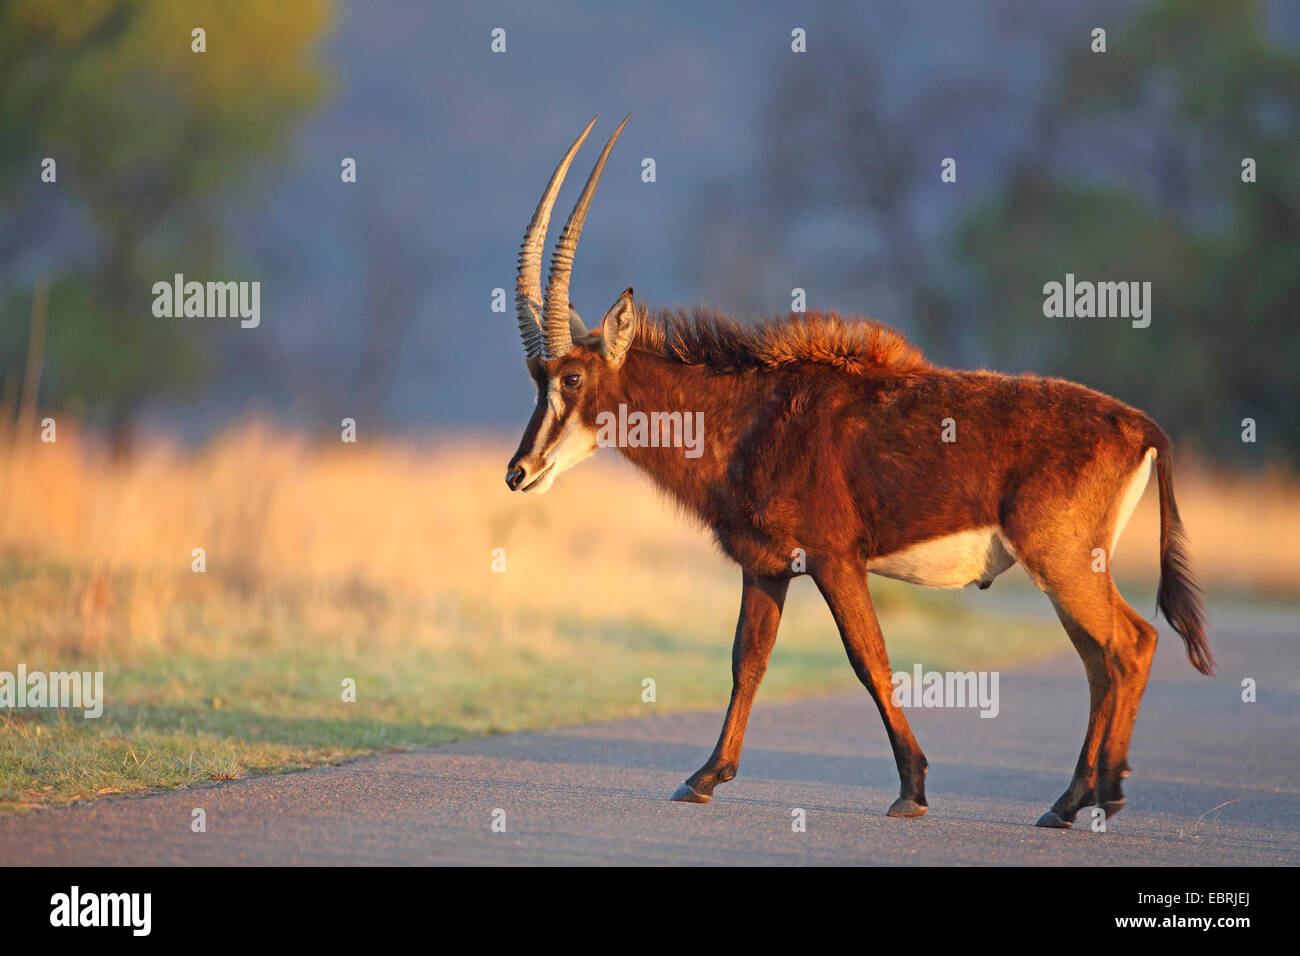 South African Sable Antelope (Hippotragus niger niger), female crosses a street, South Africa, Kgaswane Mountain Reserve Stock Photo